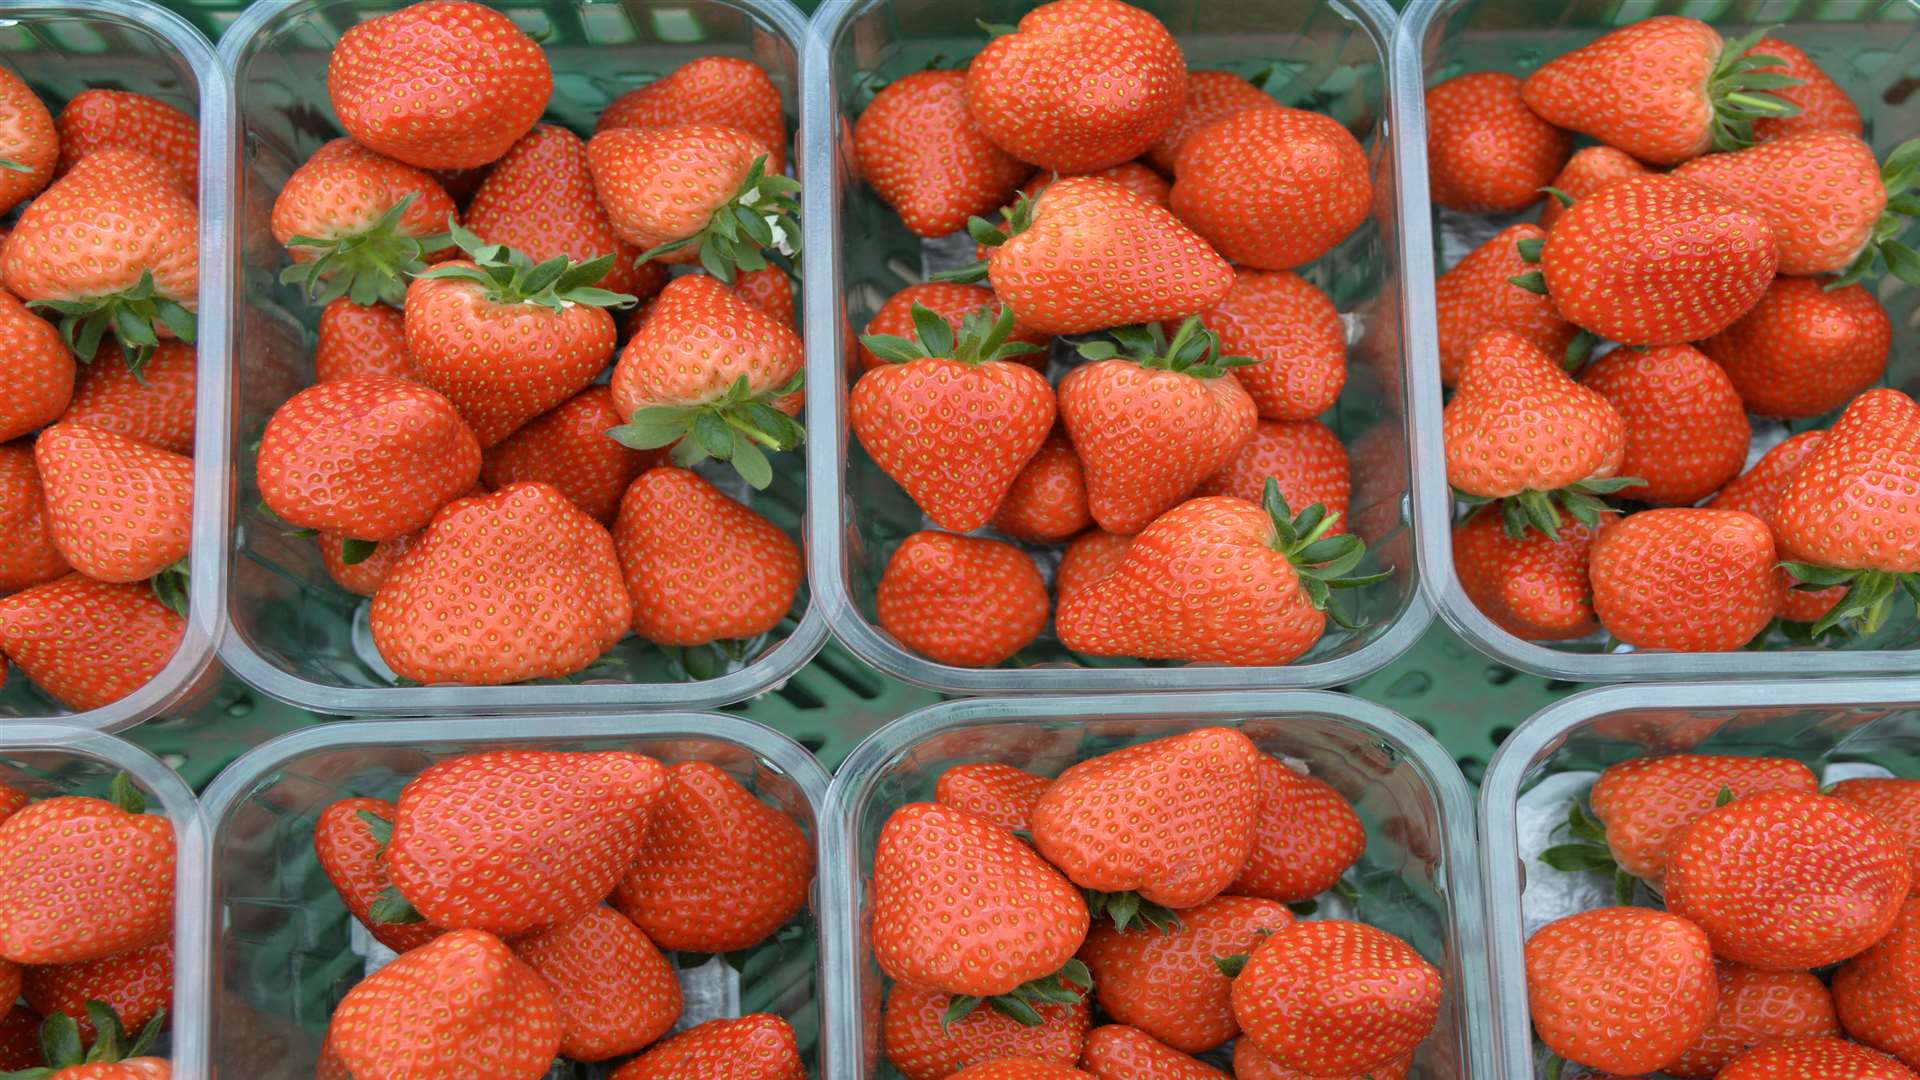 Strawberries covered in poisonous chemicals were stolen from a farm in Ulcombe. Stock image